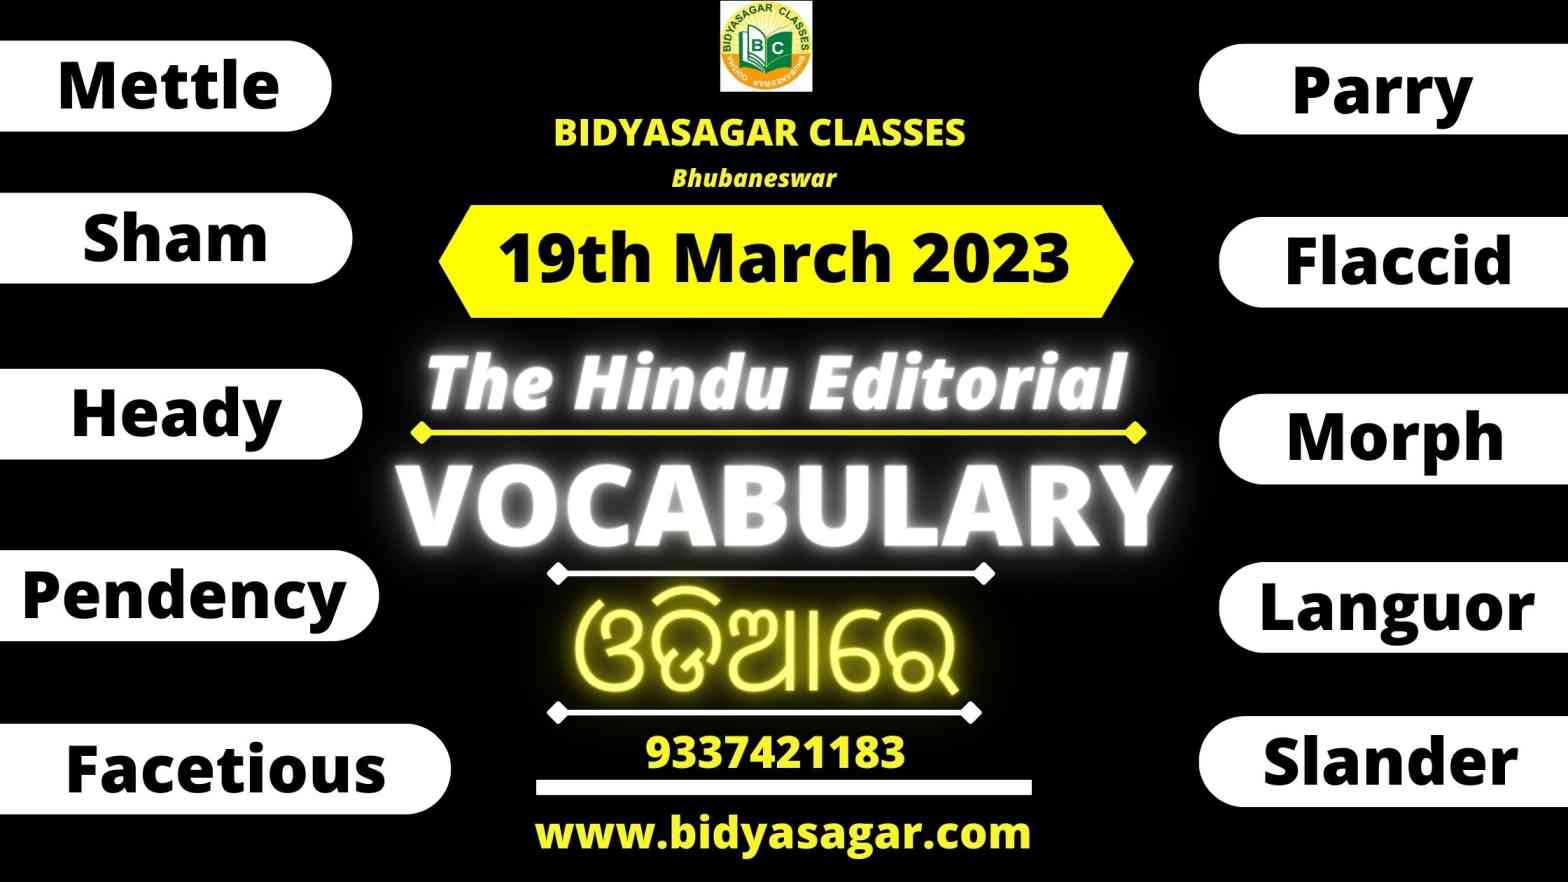 The Hindu Editorial Vocabulary of 19th March 2023